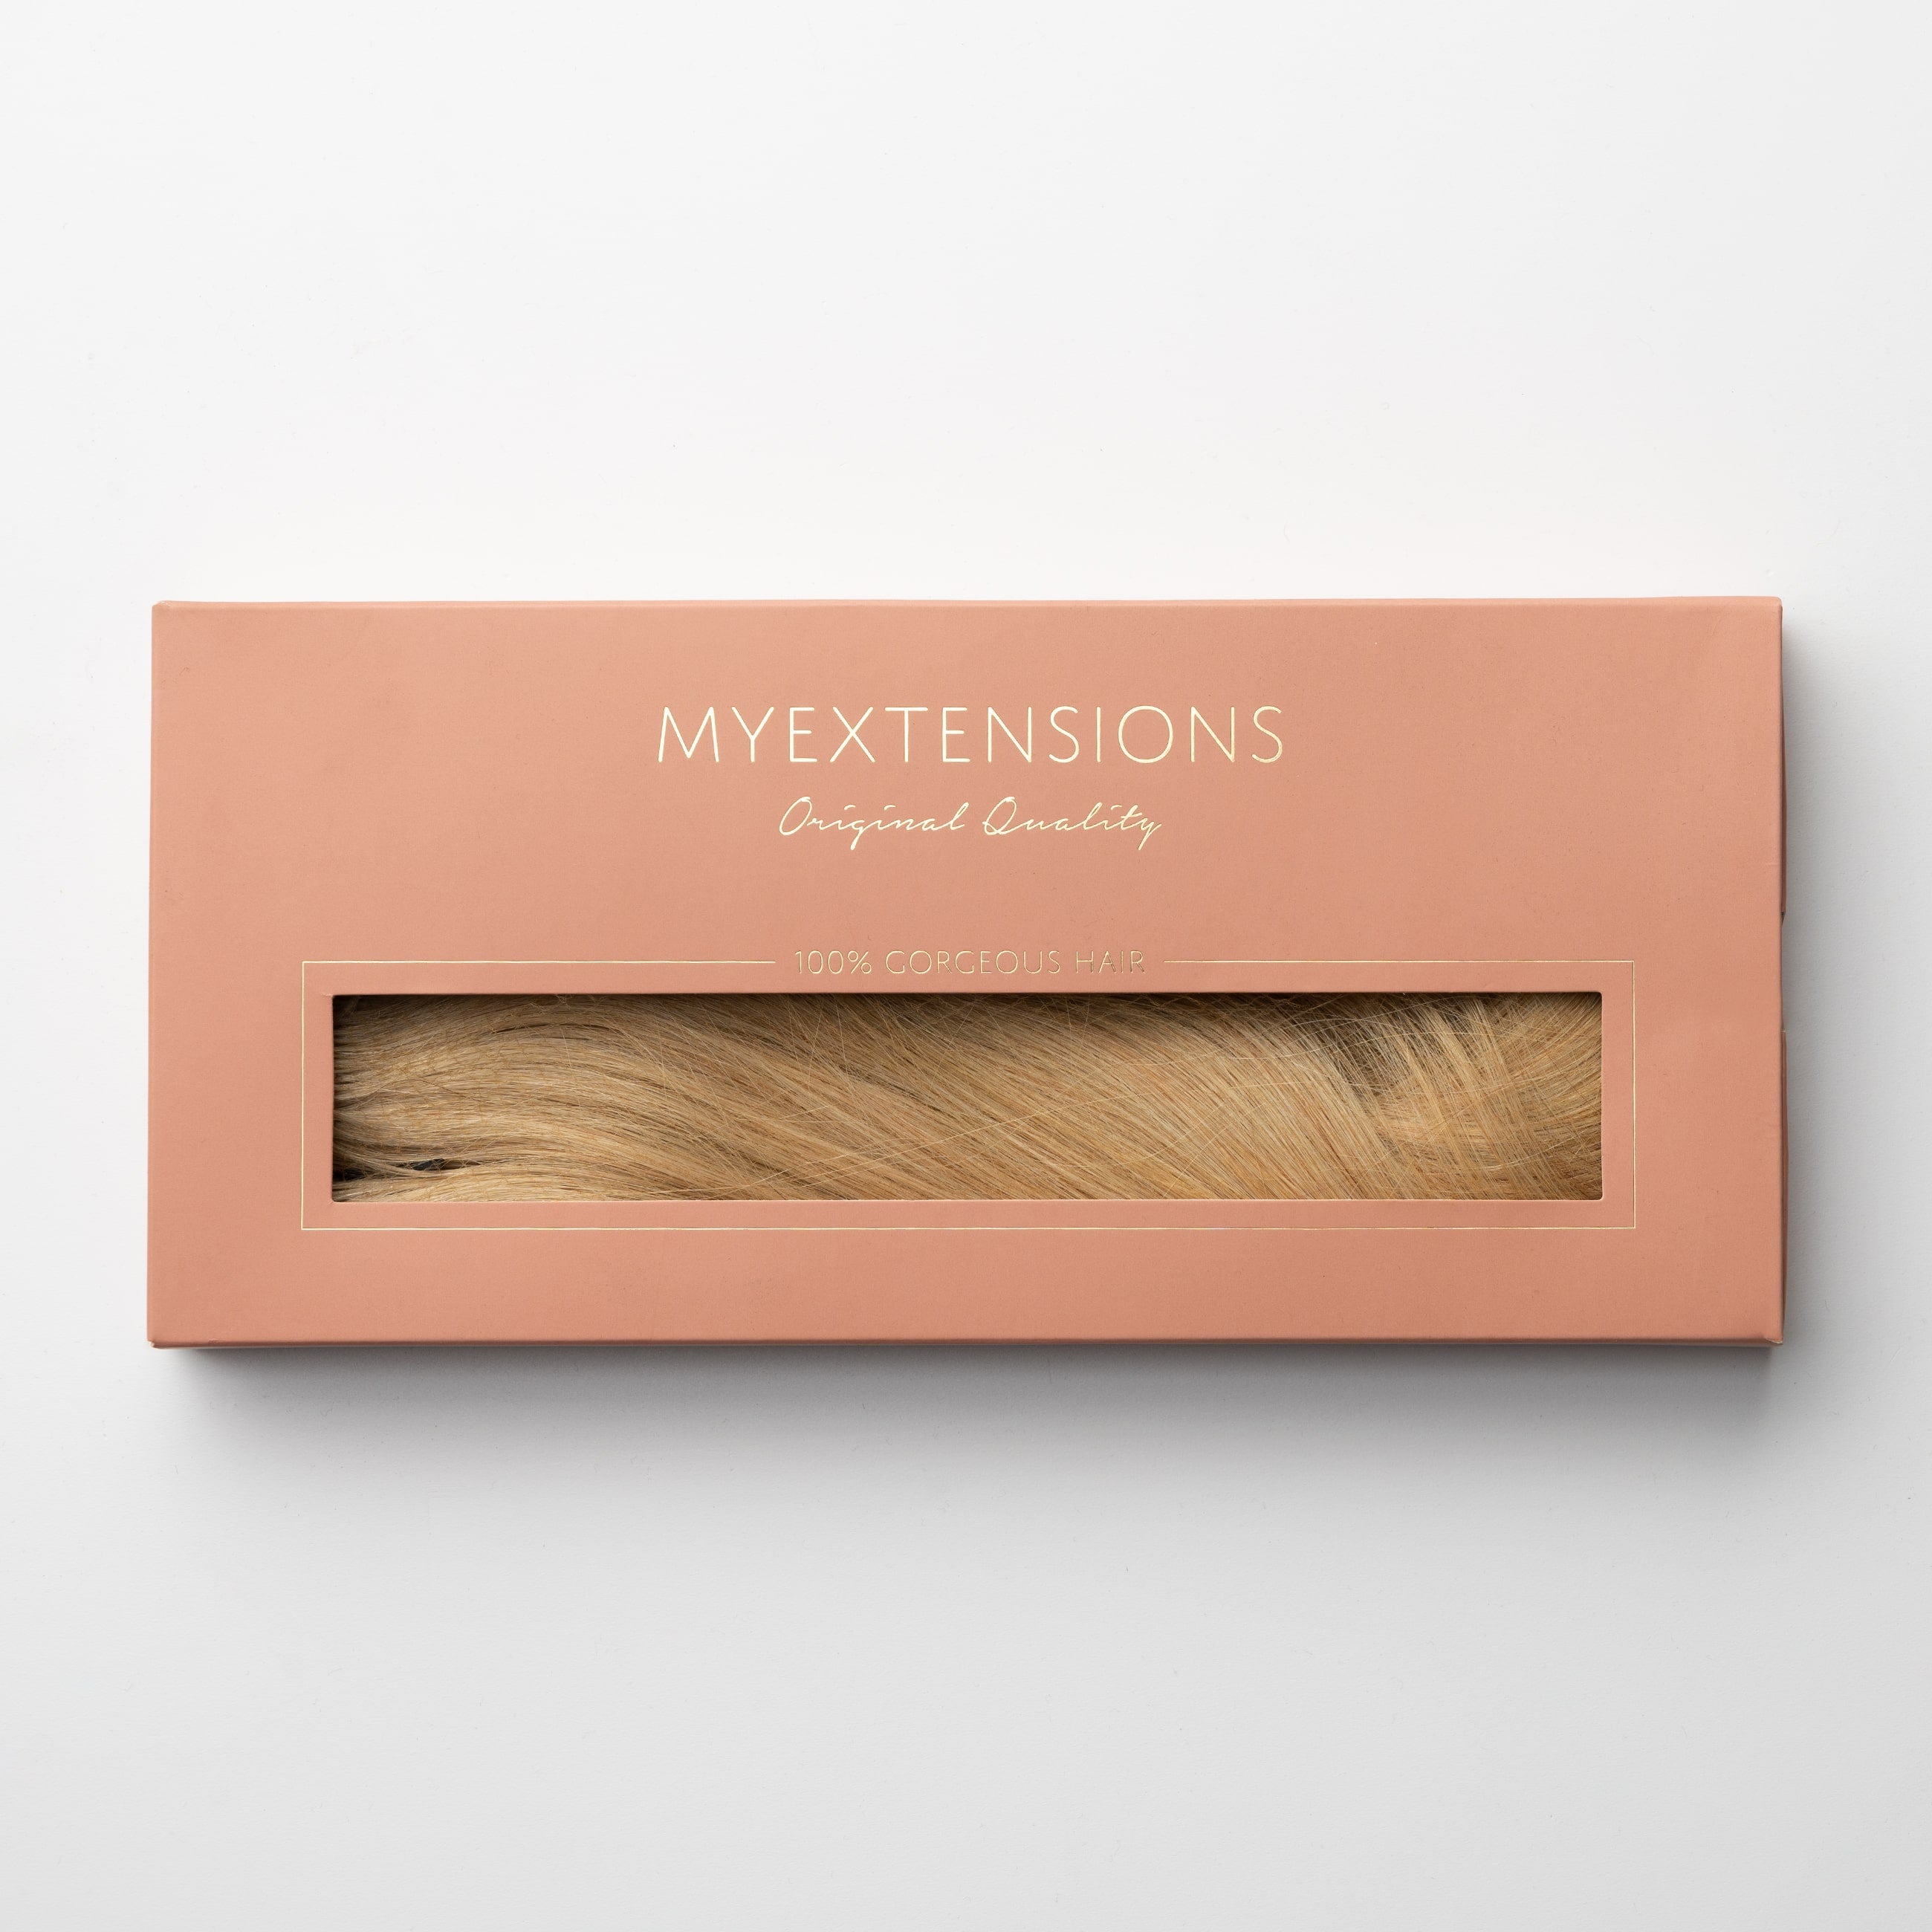 Ponytail Extensions - Honey Blonde 15A